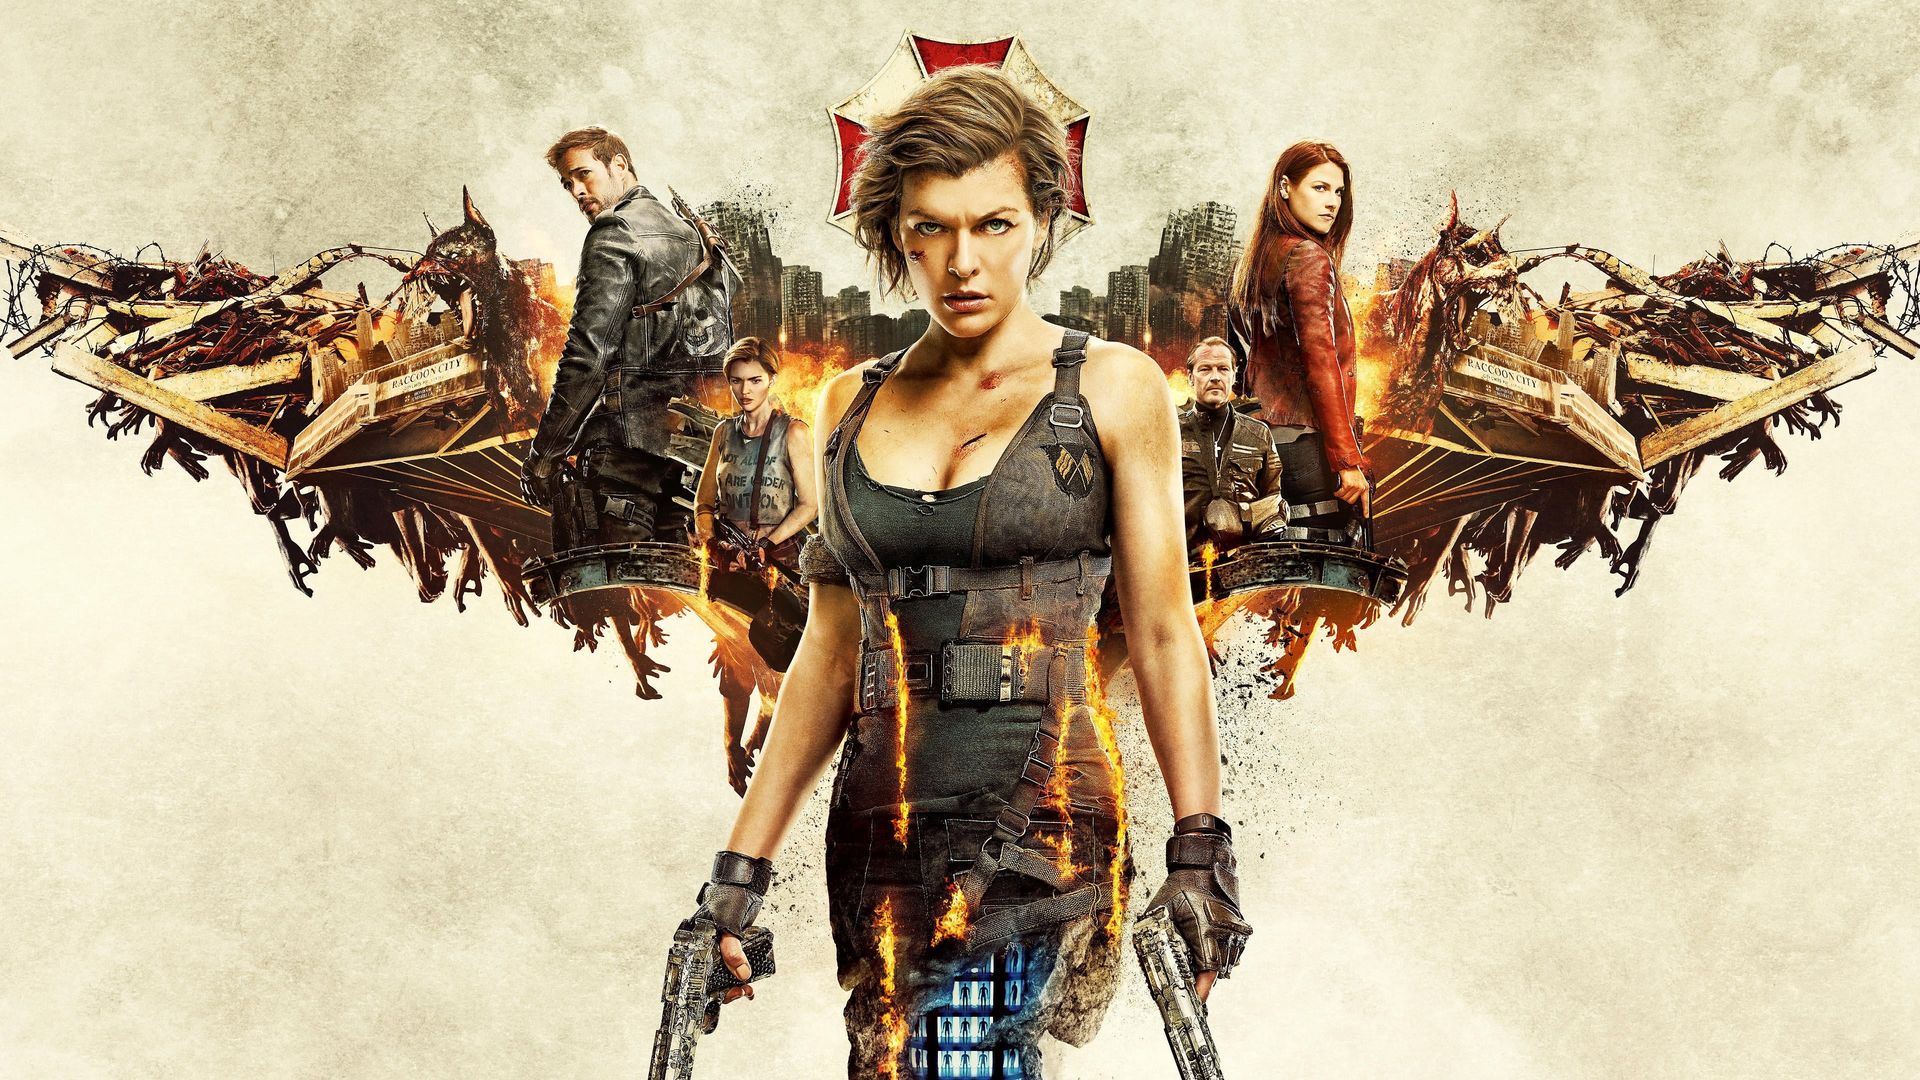 Resident Evil: The Final Chapter Backdrop